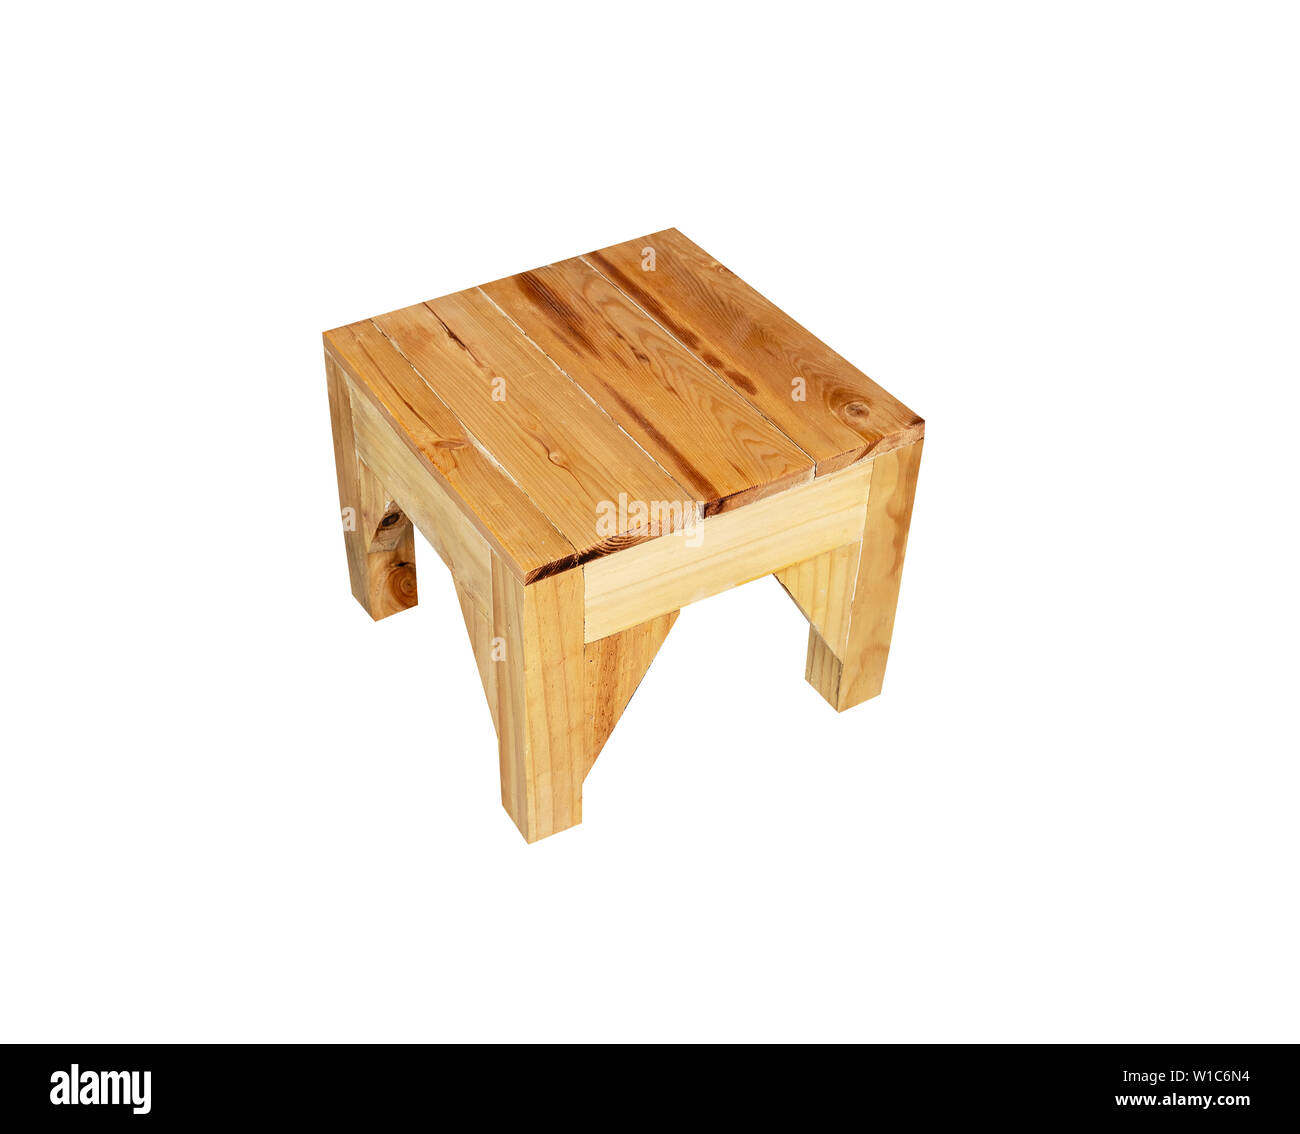 https://c8.alamy.com/comp/W1C6N4/small-wooden-chair-isolated-on-white-background-with-clipping-path-W1C6N4.jpg